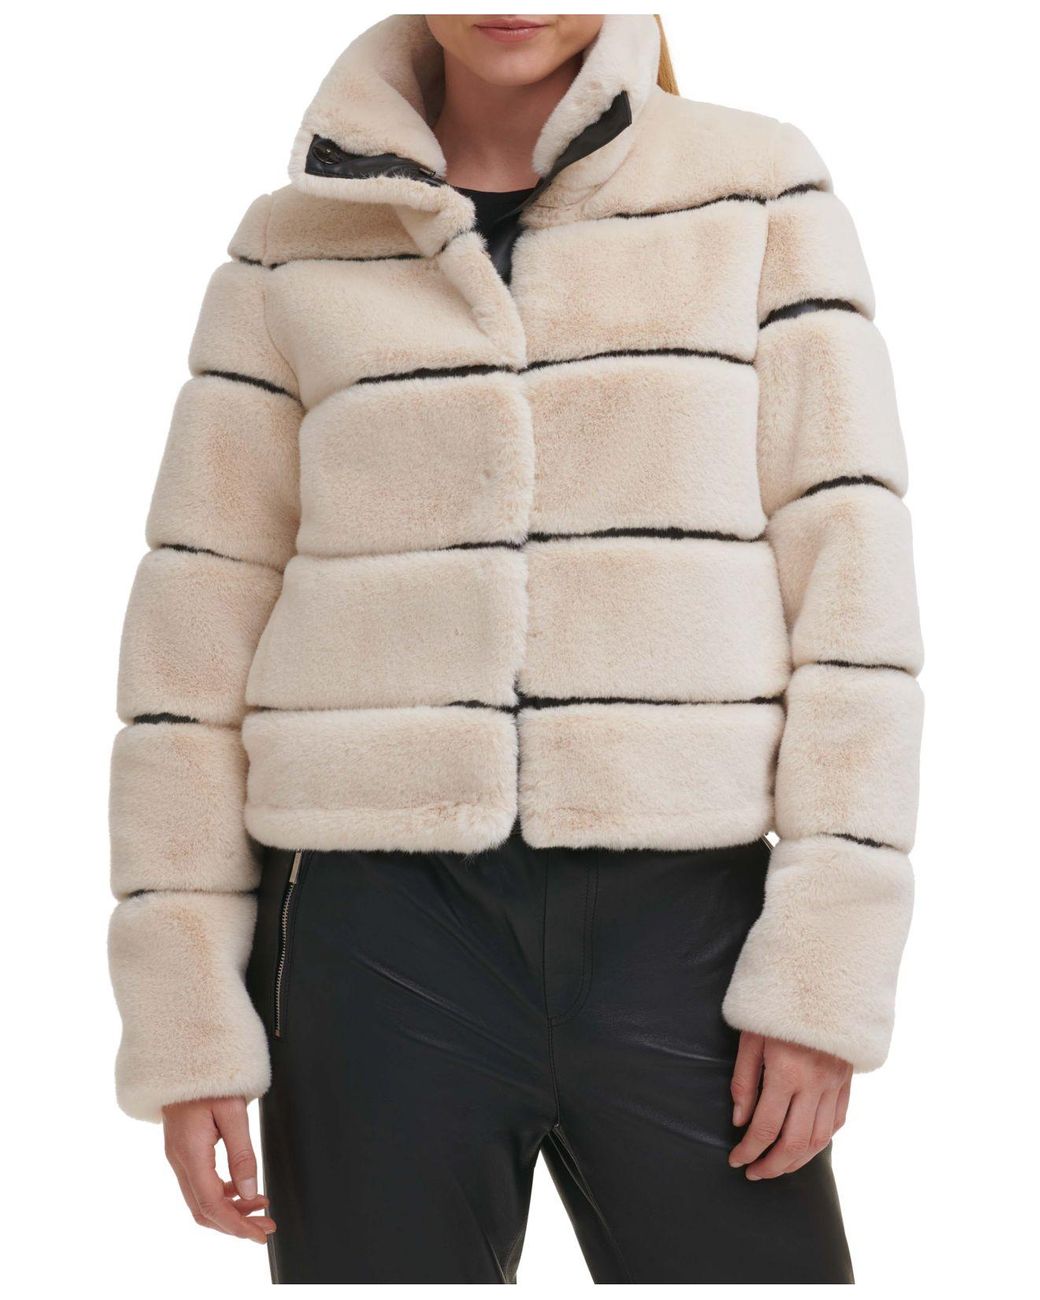 Karl Lagerfeld Faux-leather & Faux-fur Coat in Natural | Lyst